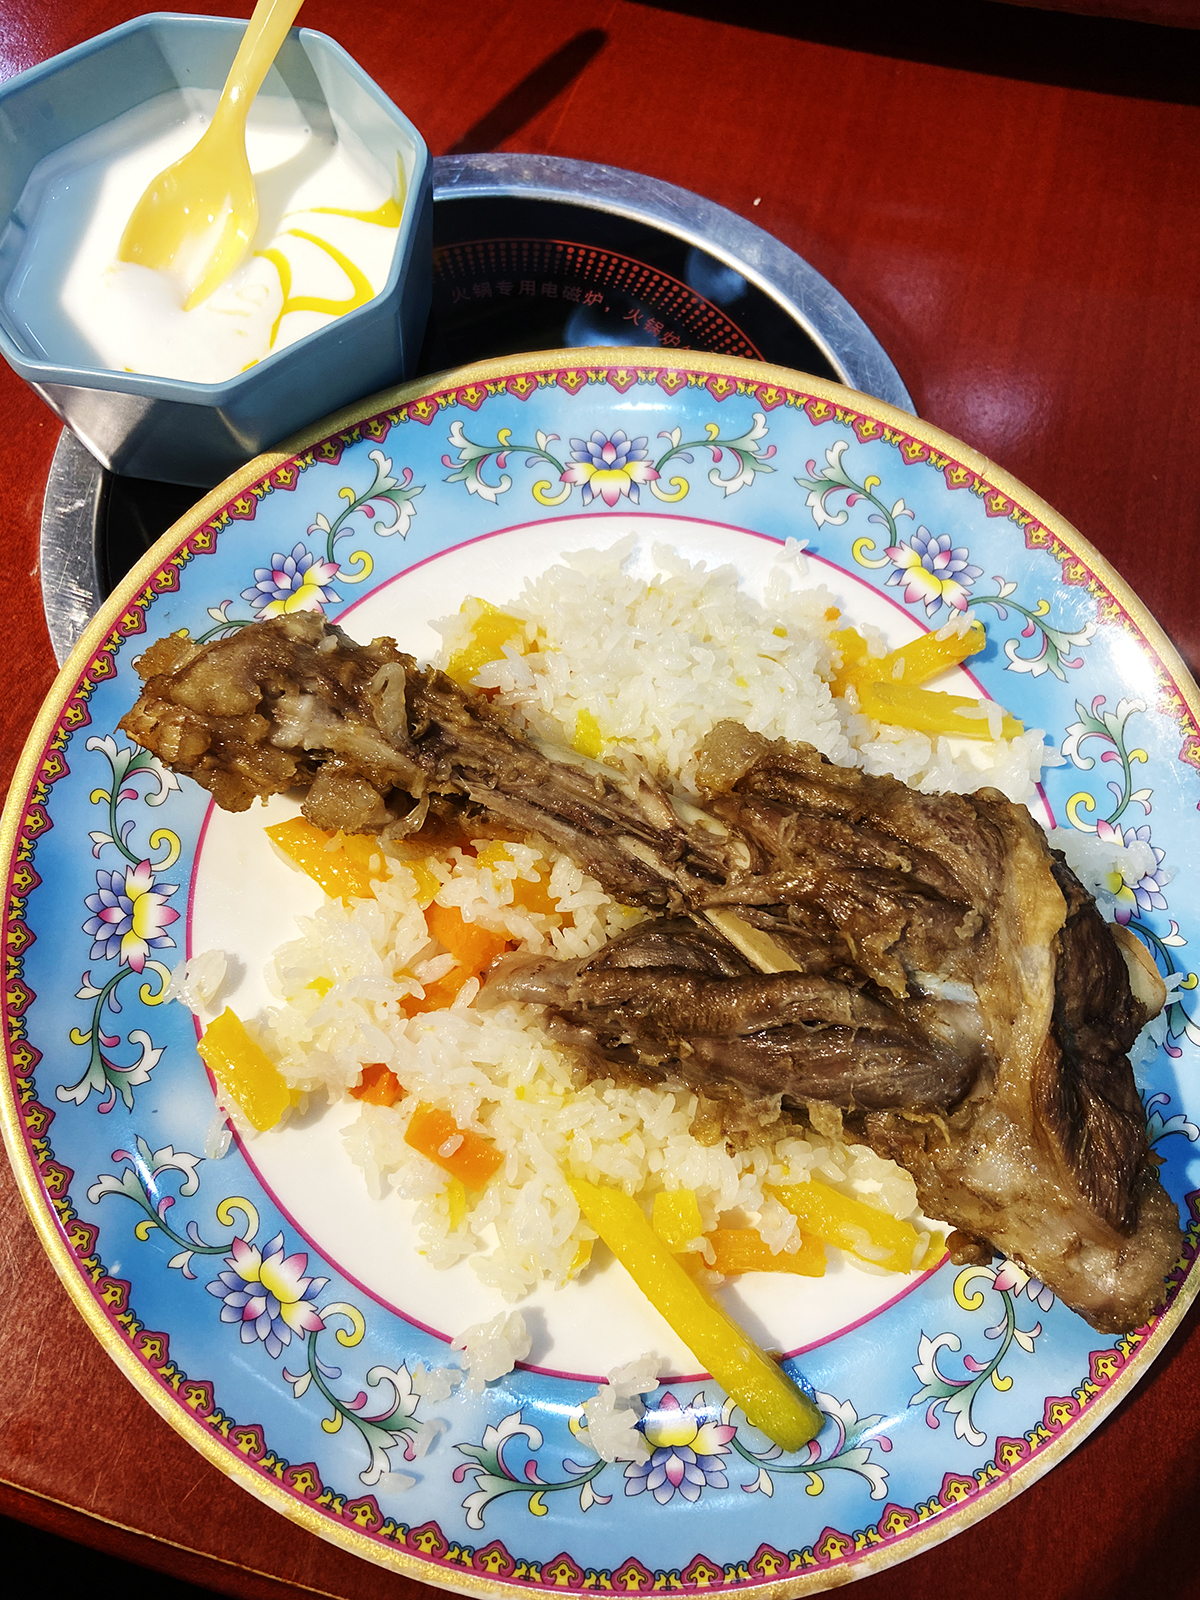 A plate of lamb shank pilaf is served at a restaurant in Xinjiang. /CGTN